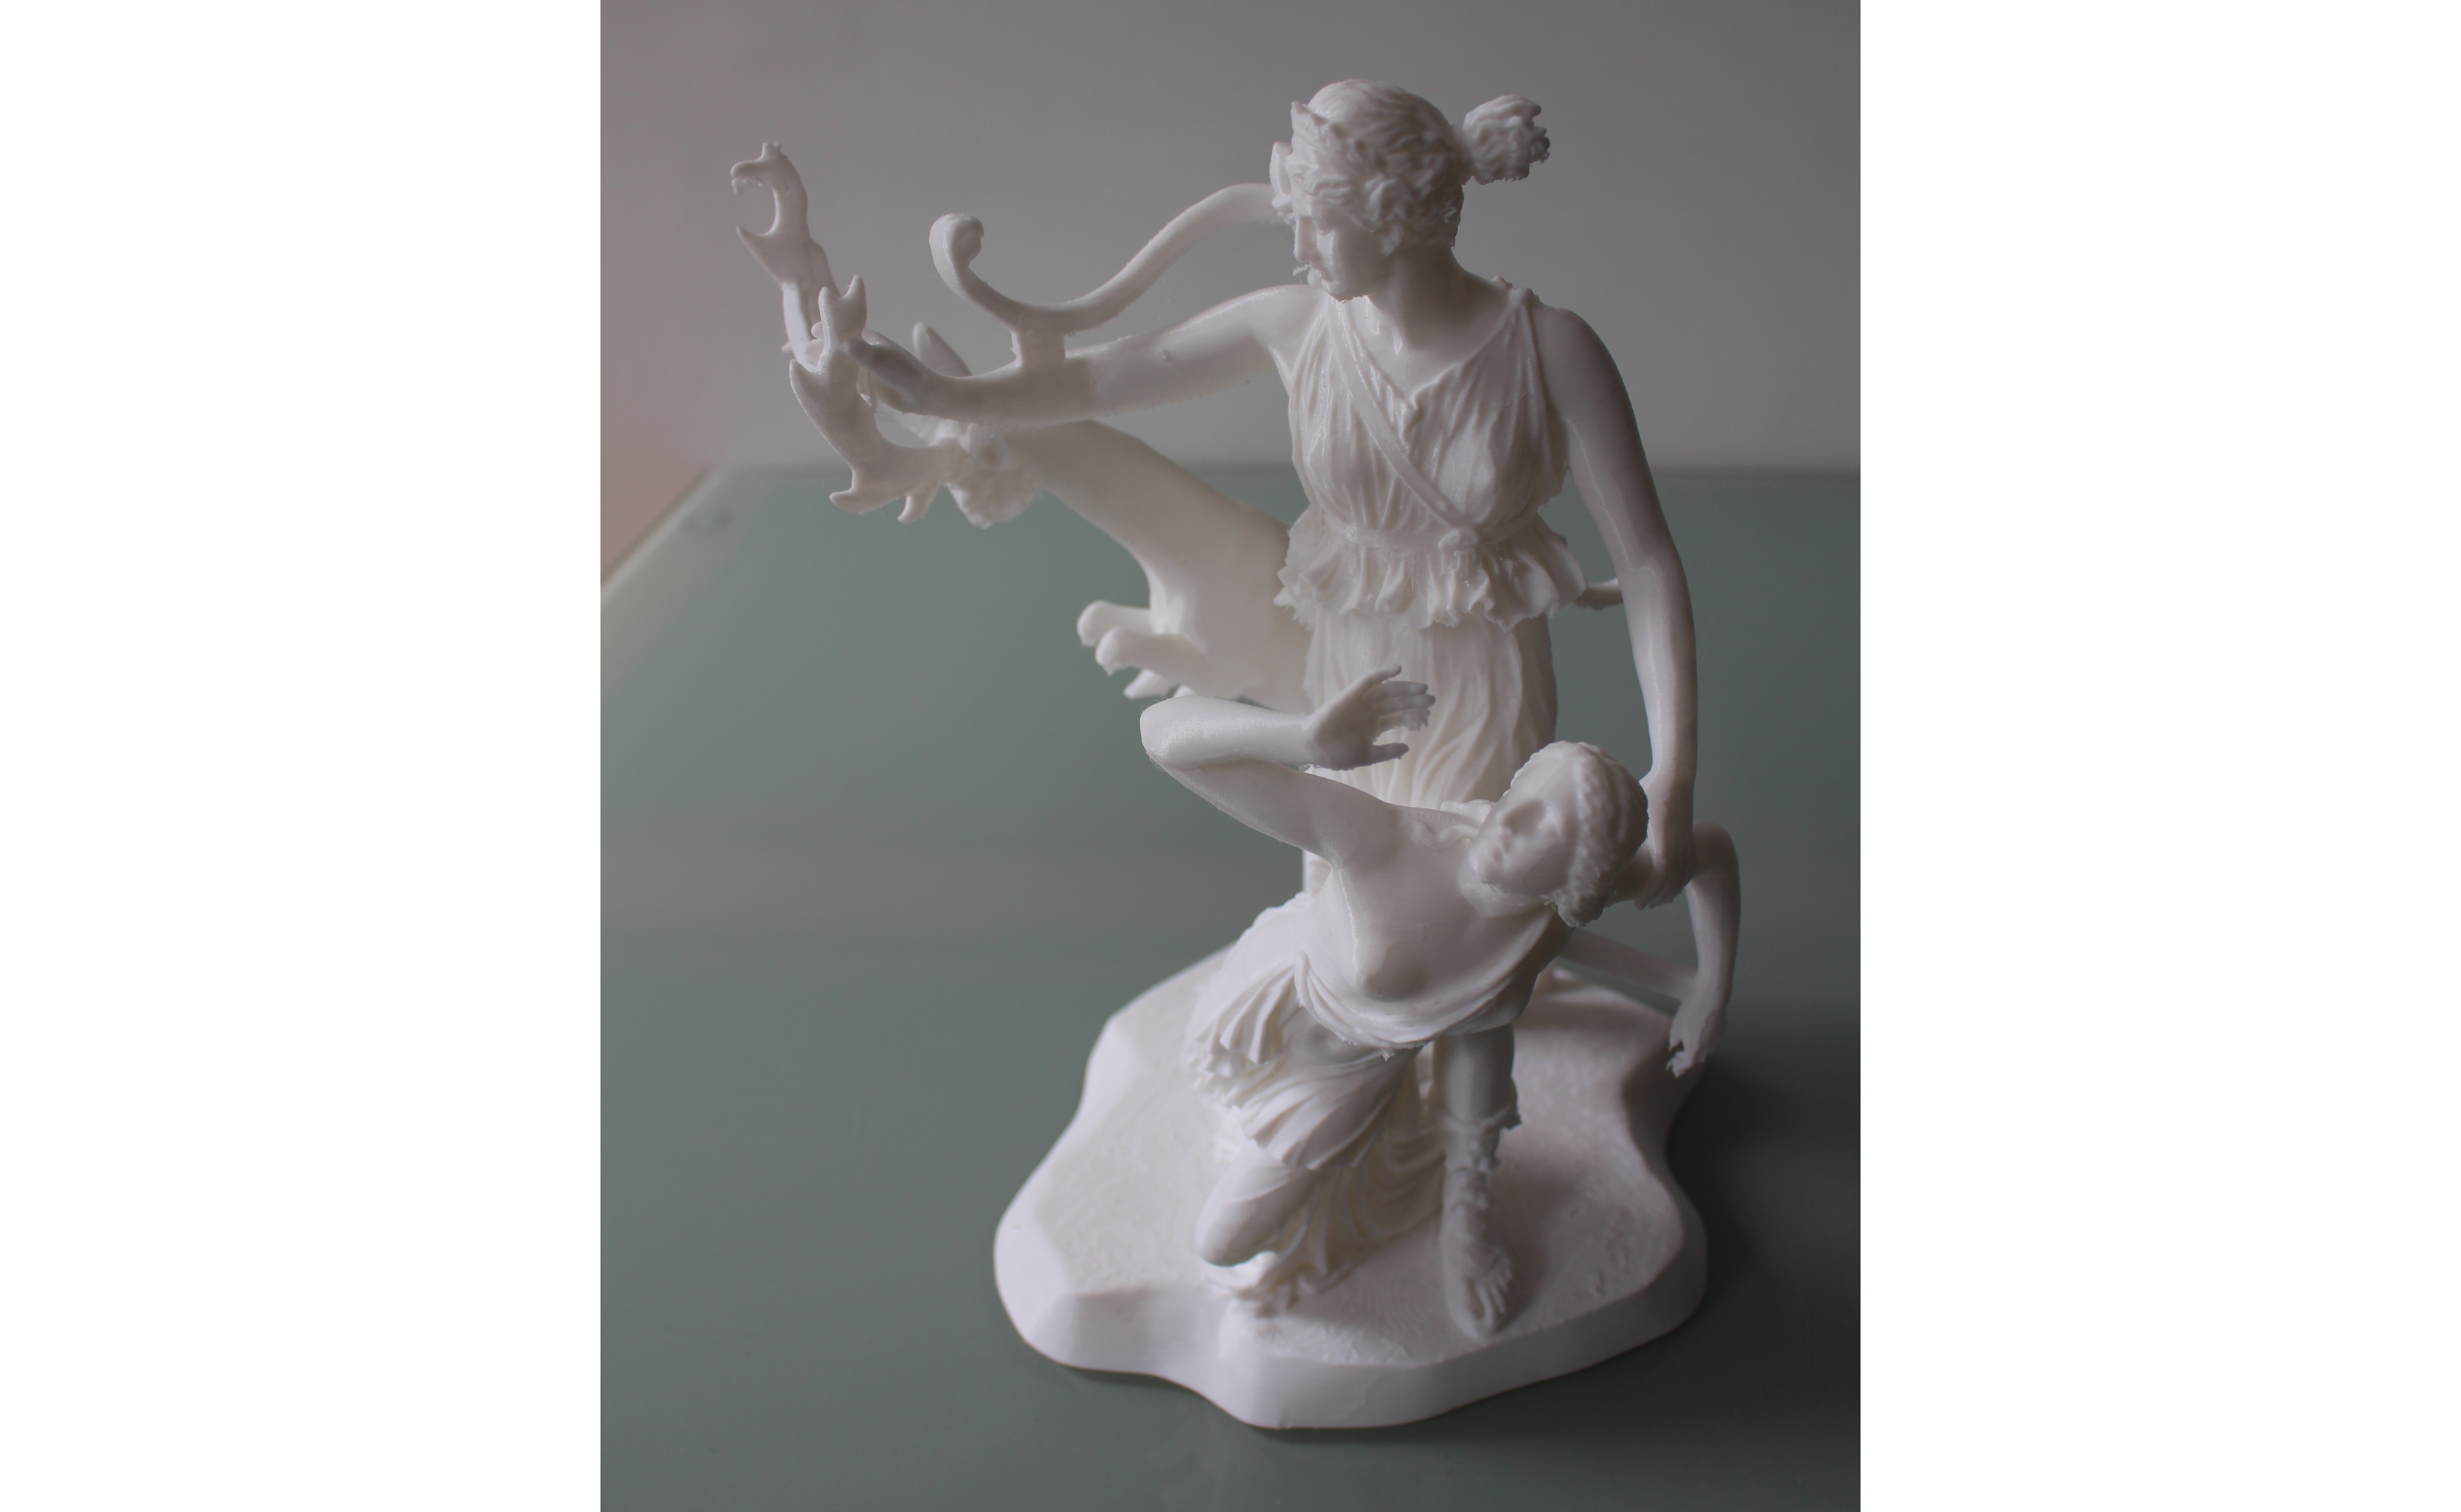 The Artemis and Iphigenia sculpture print. Photo by 3D Printing Industry.